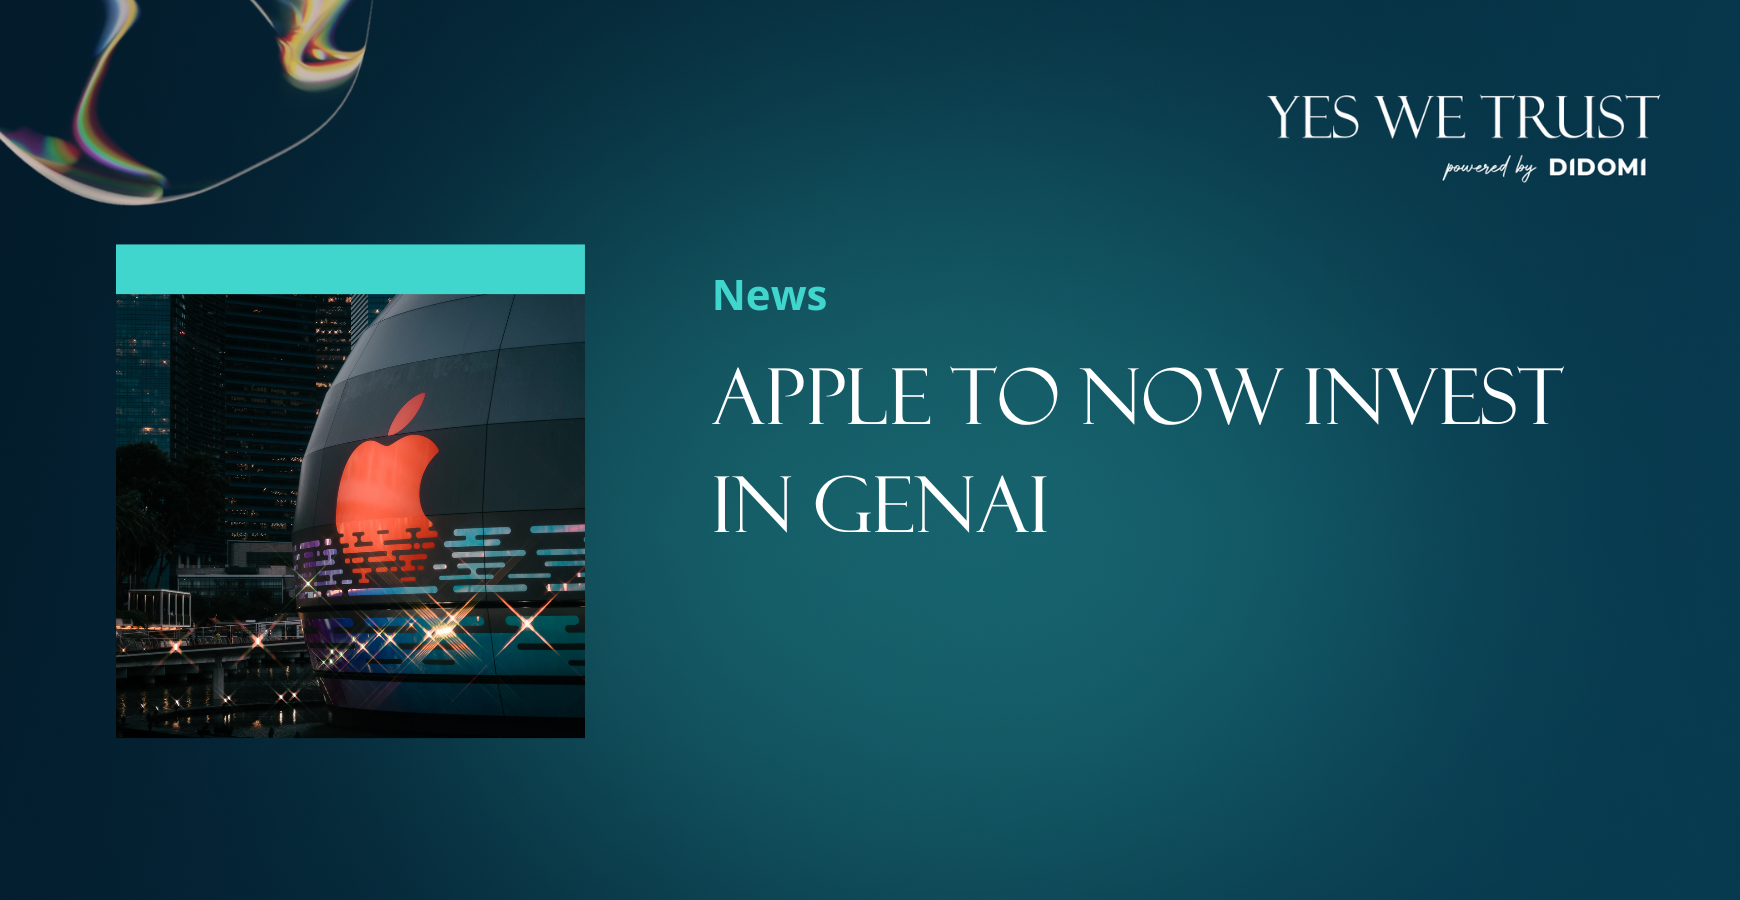 Apple to now invest in GenAI